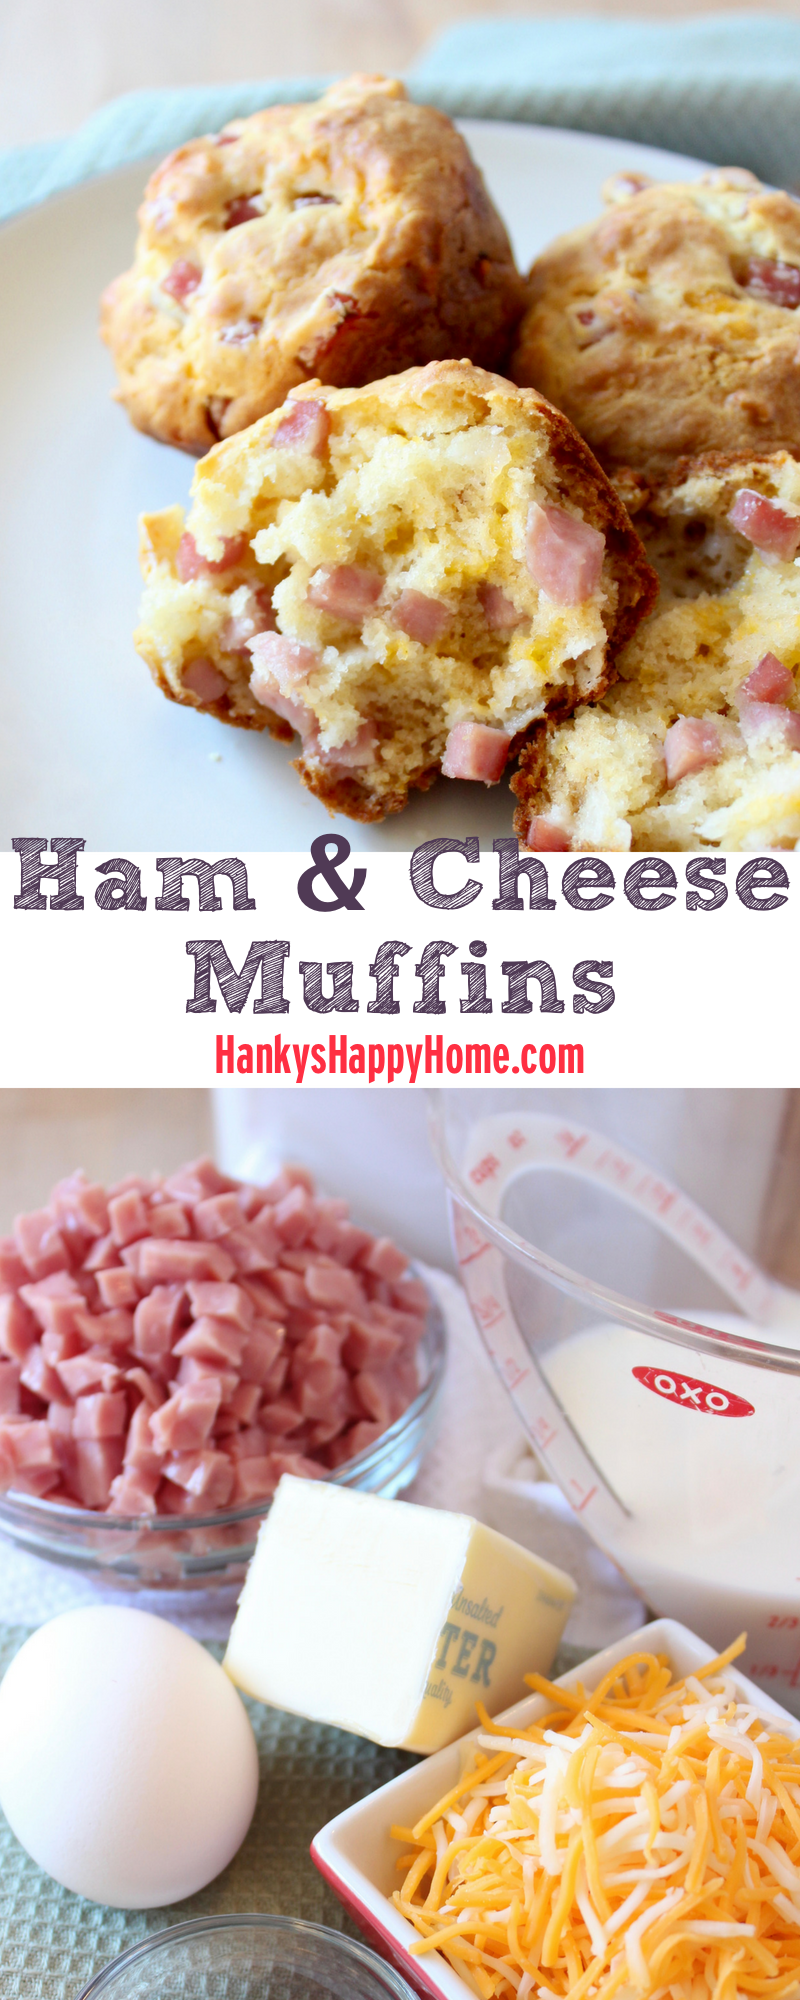 These savory Ham & Cheese Muffins make a great breakfast or quick snack. Perfect for little hands and busy parents.